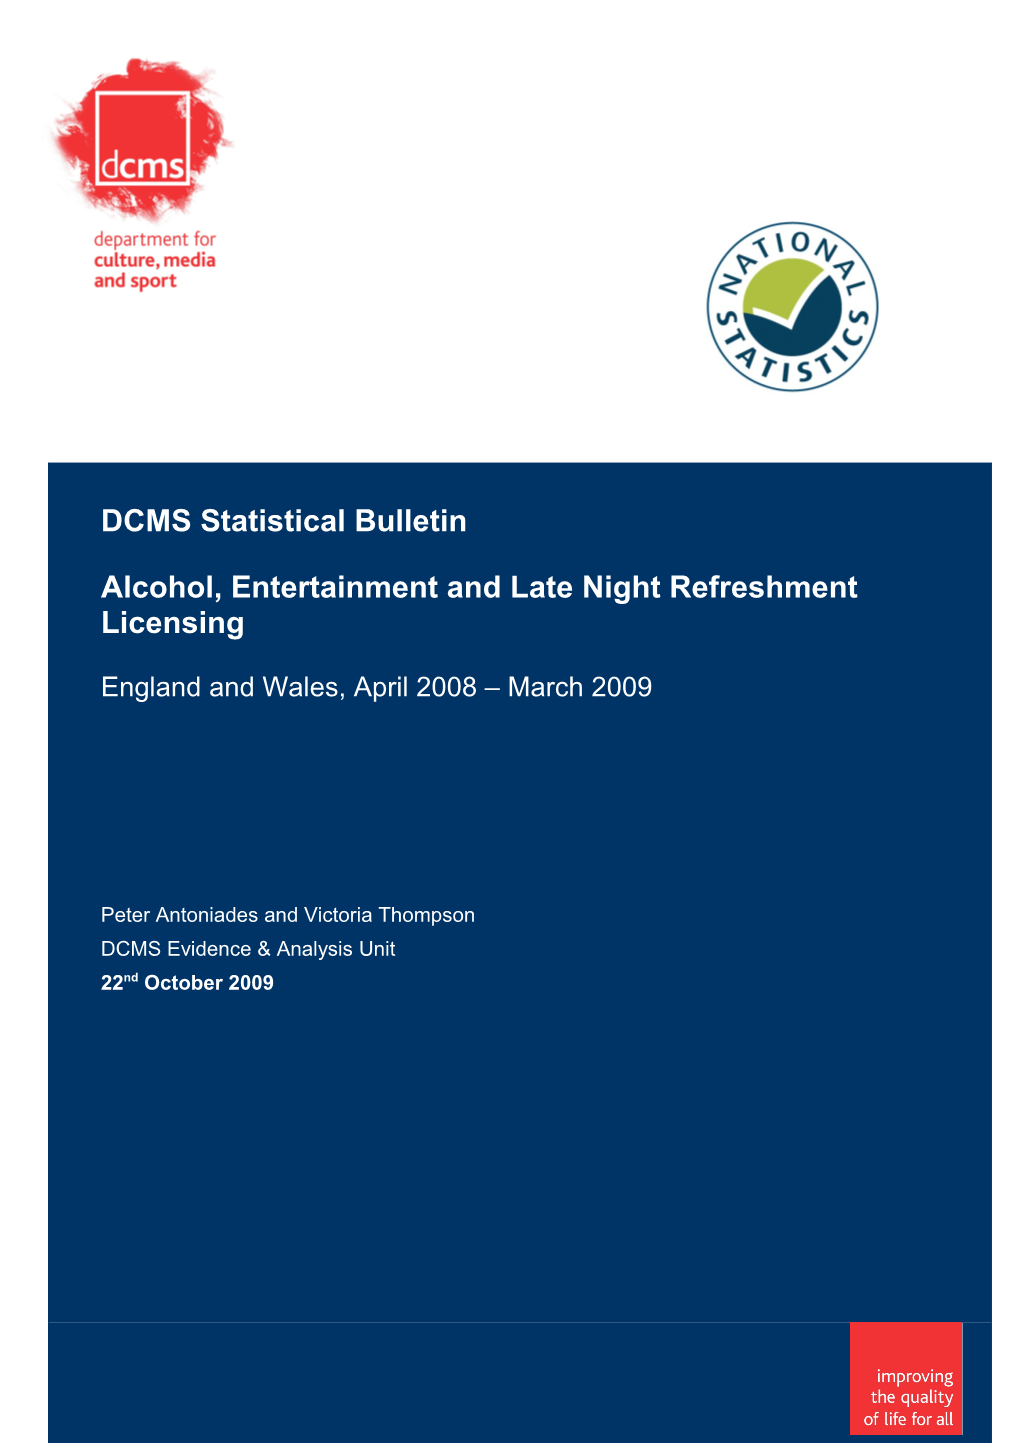 Alcohol, Entertainment and Late Night Refreshment Licensing Statistical Bulletin